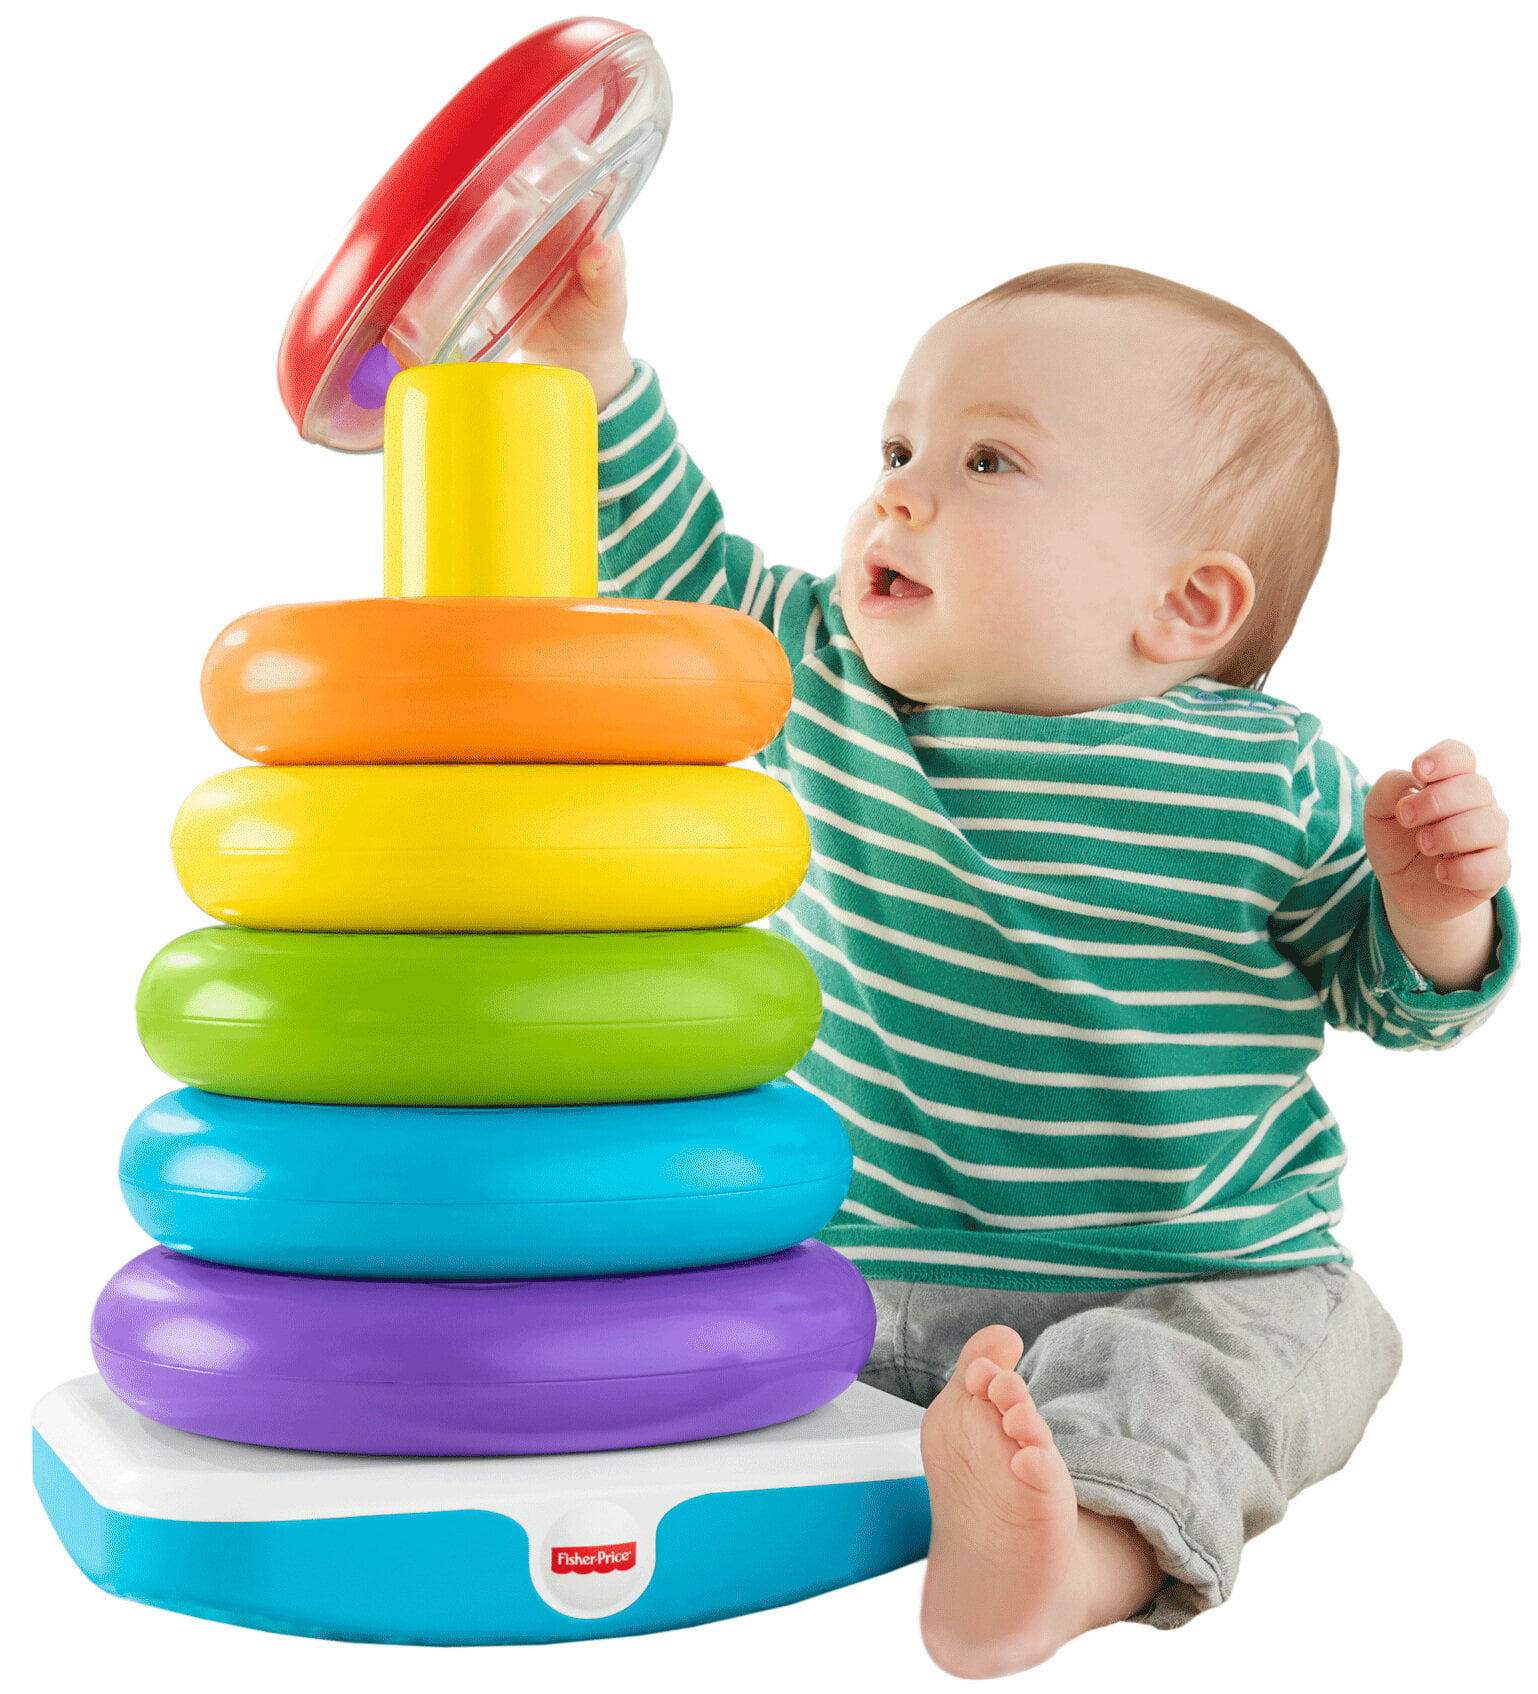 Stacking Toy Sensory Rings Toy for Baby Sassy Stacks Wooden Toys Learning Toys for Toddlers Stacking Rings Sensory Toys for 1 Year Old Adadnap Stackable Rings Baby 